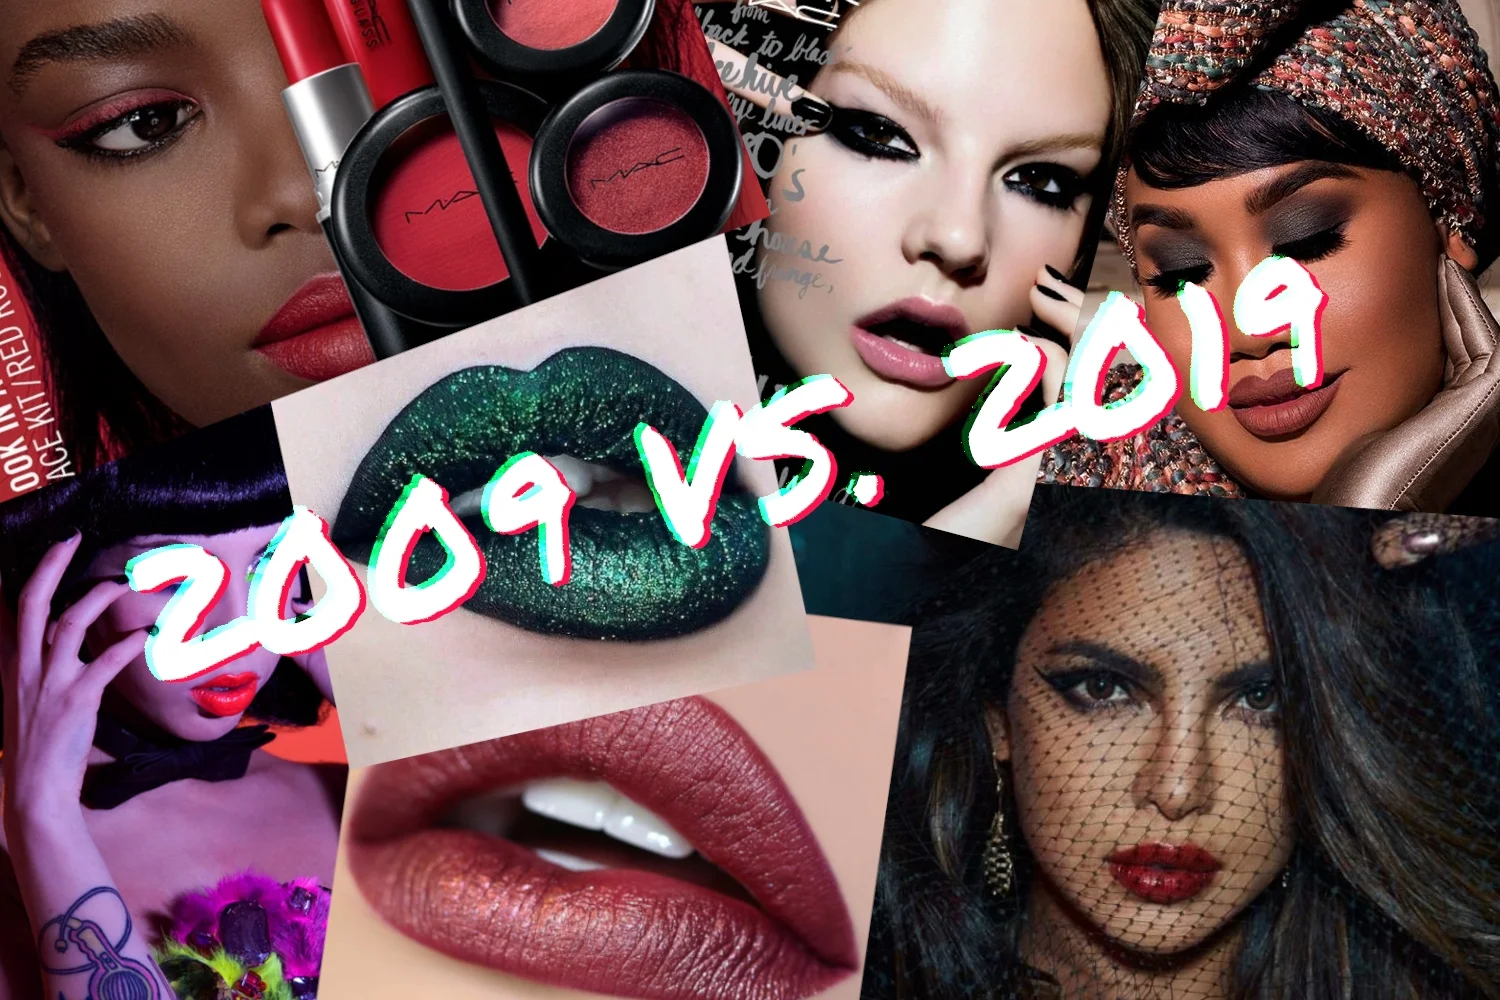 makeup collage showin how th emakeup industry have changed for the past 10 years #10yearschallenge